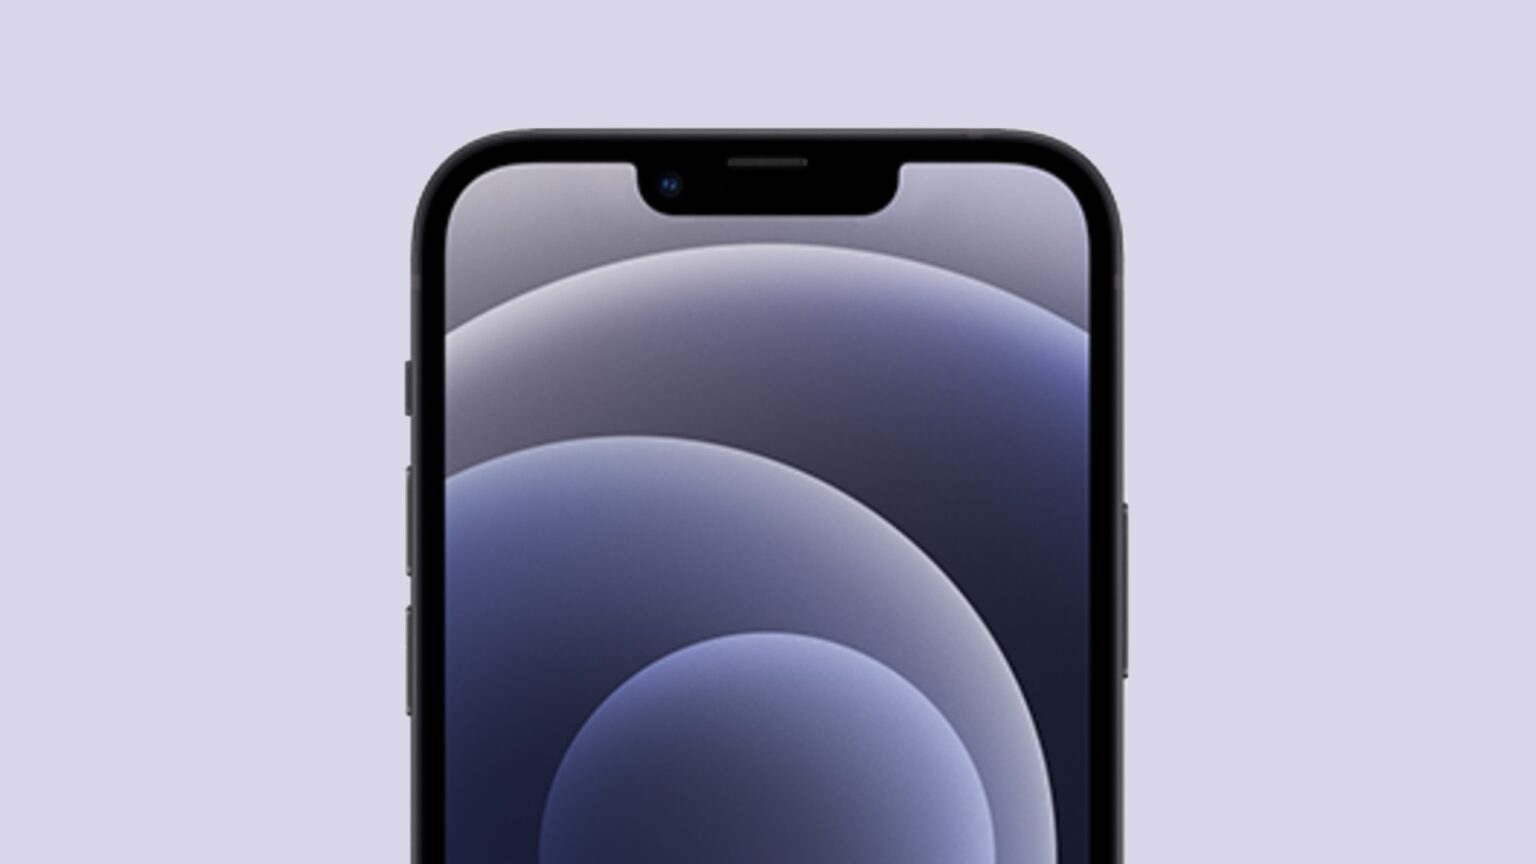 This concept image shows how the iPhone 13 notch might shrink.